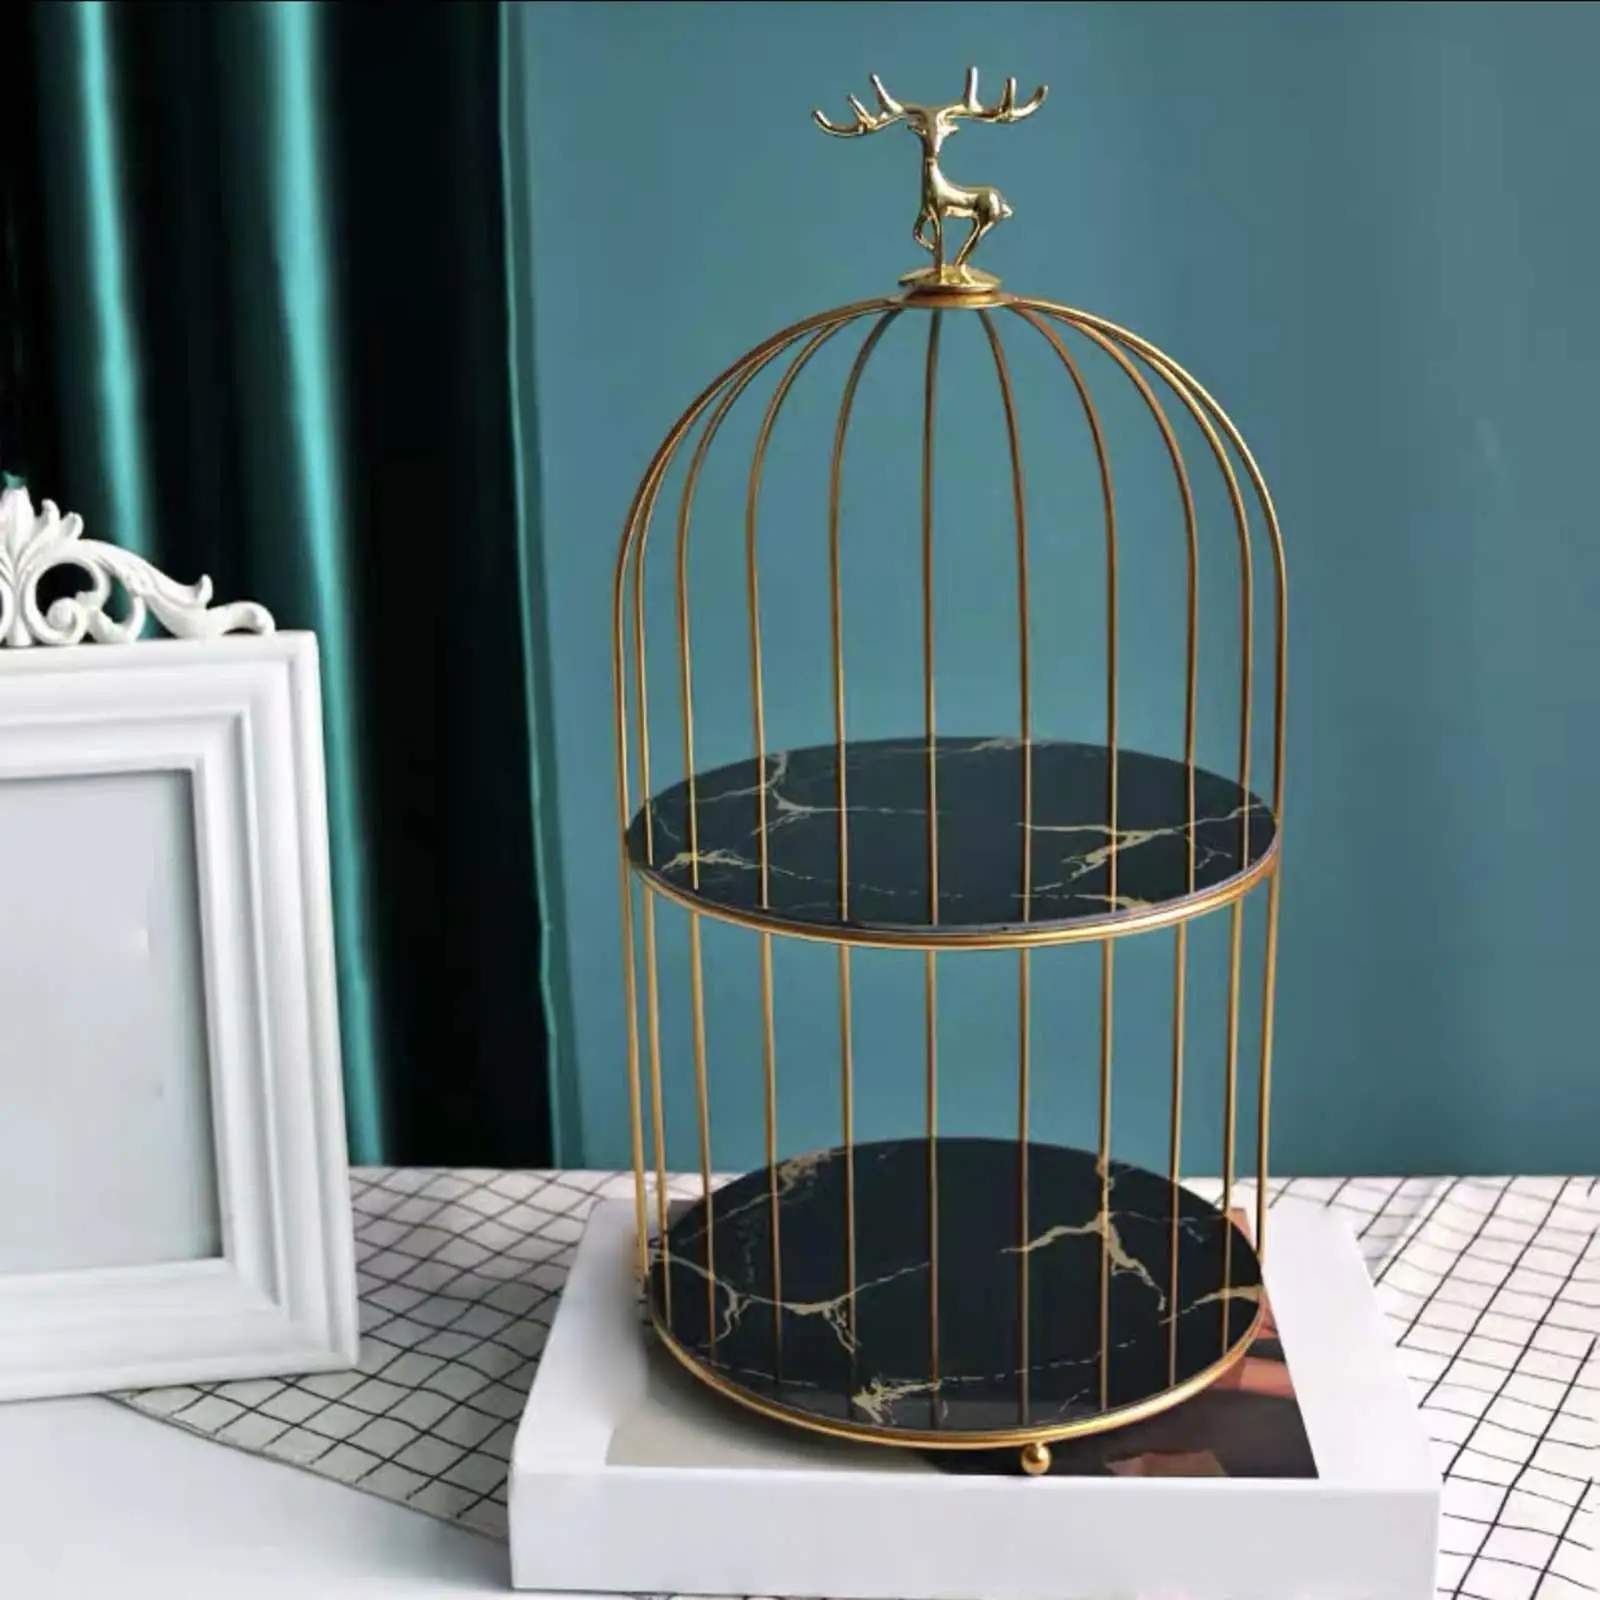 Bird Cage Makeup Organizer Skin Care Products Bathroom Cosmetic Storage Rack